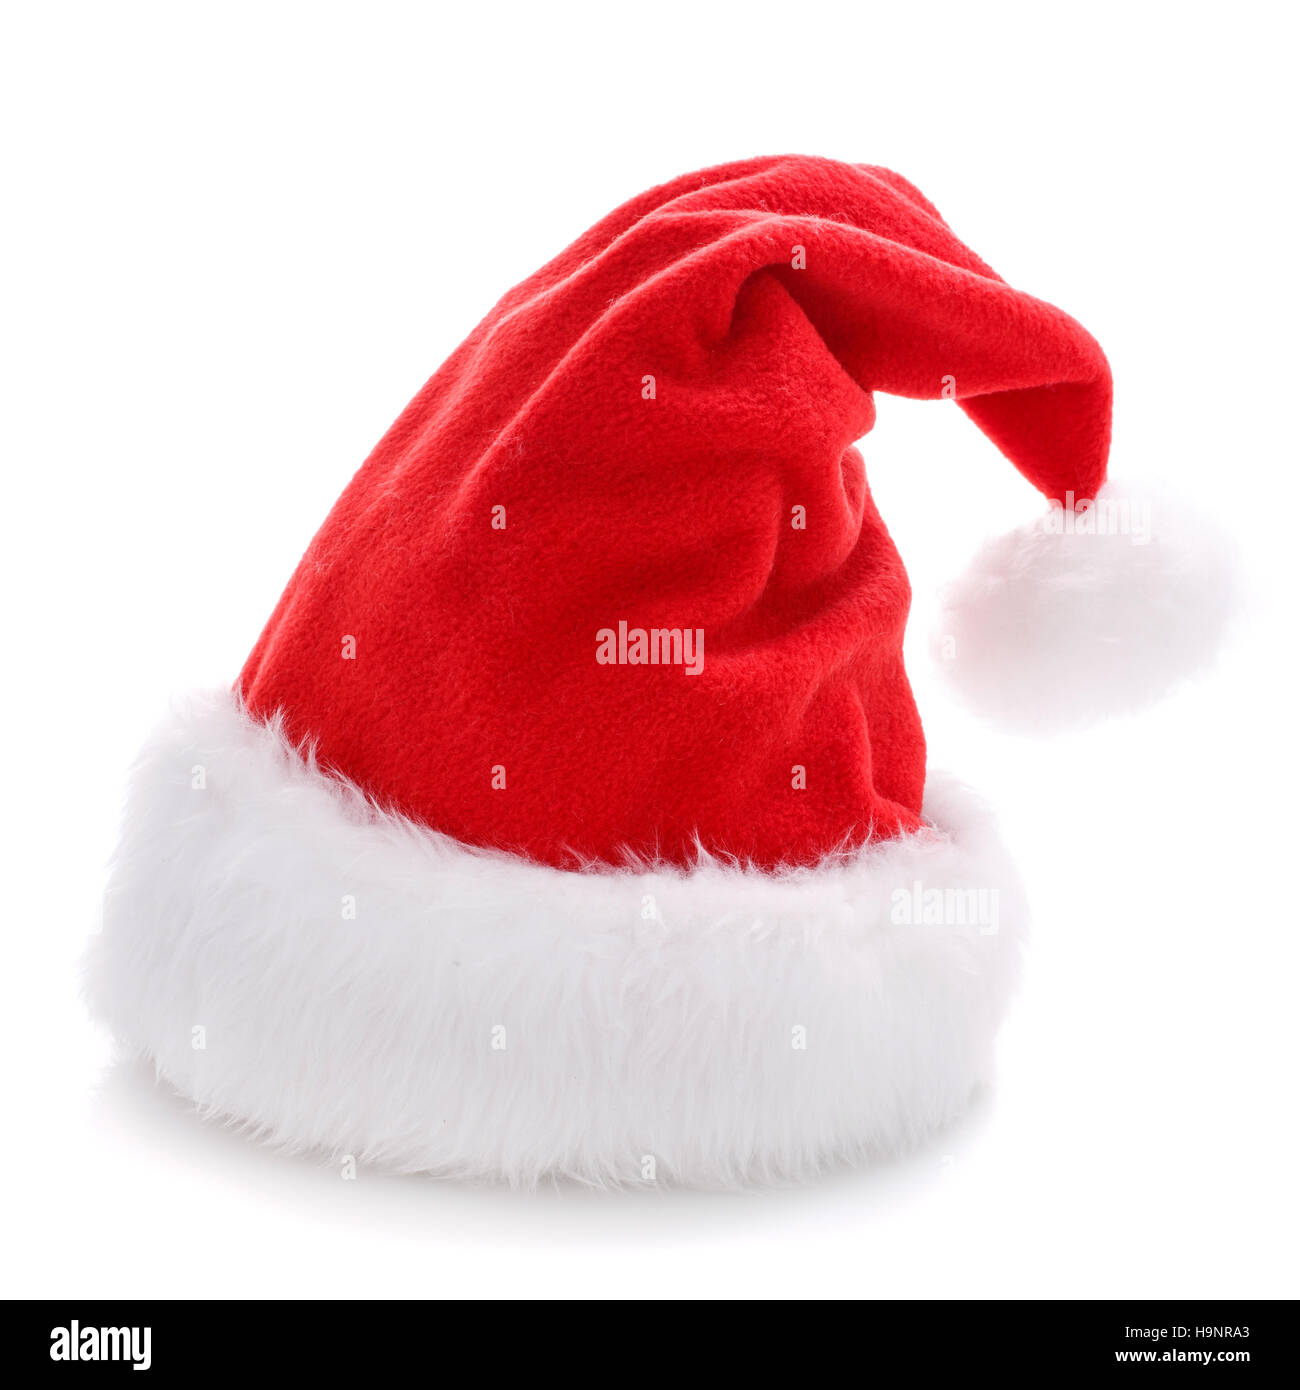 Santa Claus red hat isolated on white Banque D'Images